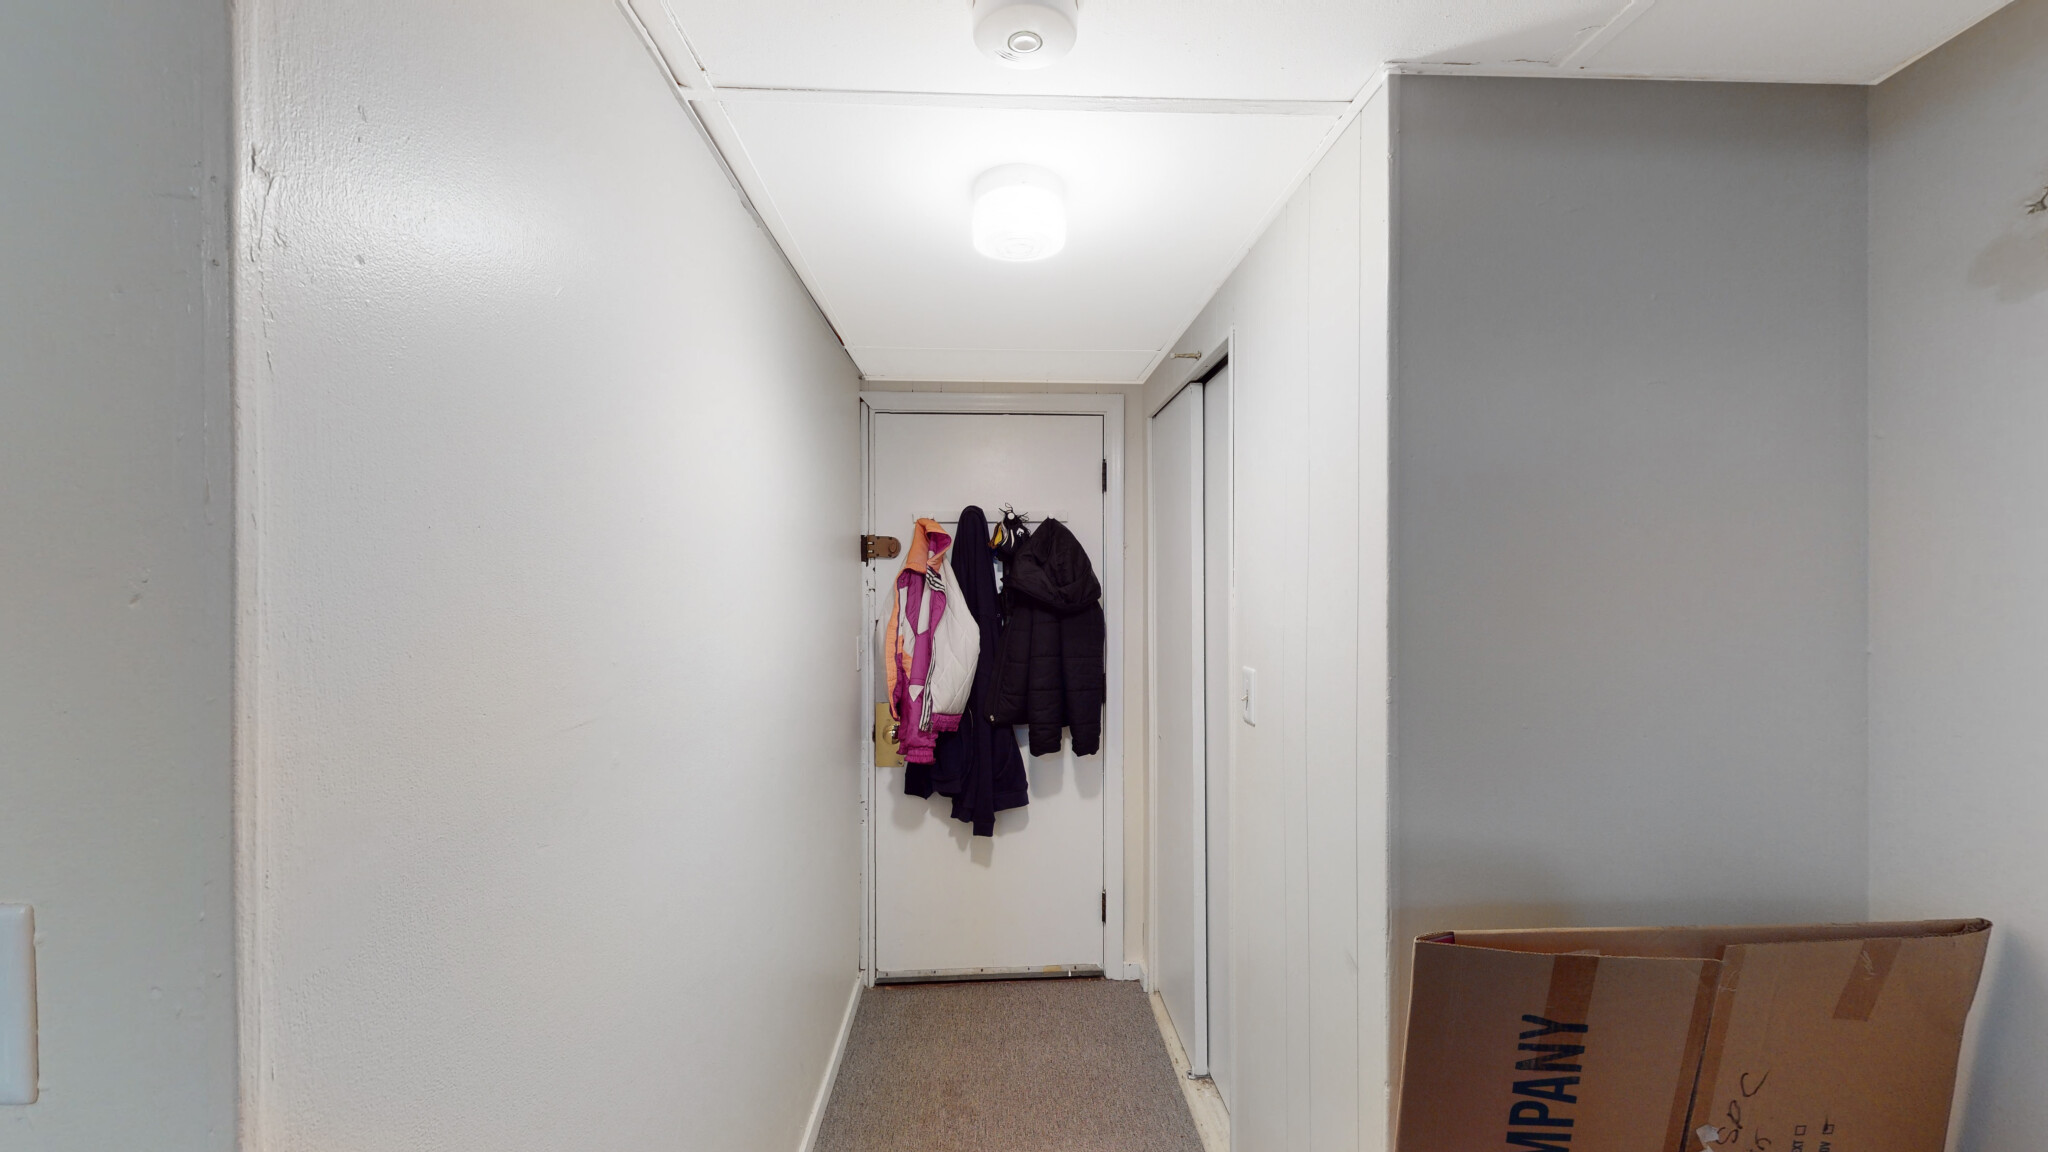 Photos of apartment on Glenville Ave.,Boston MA 02134